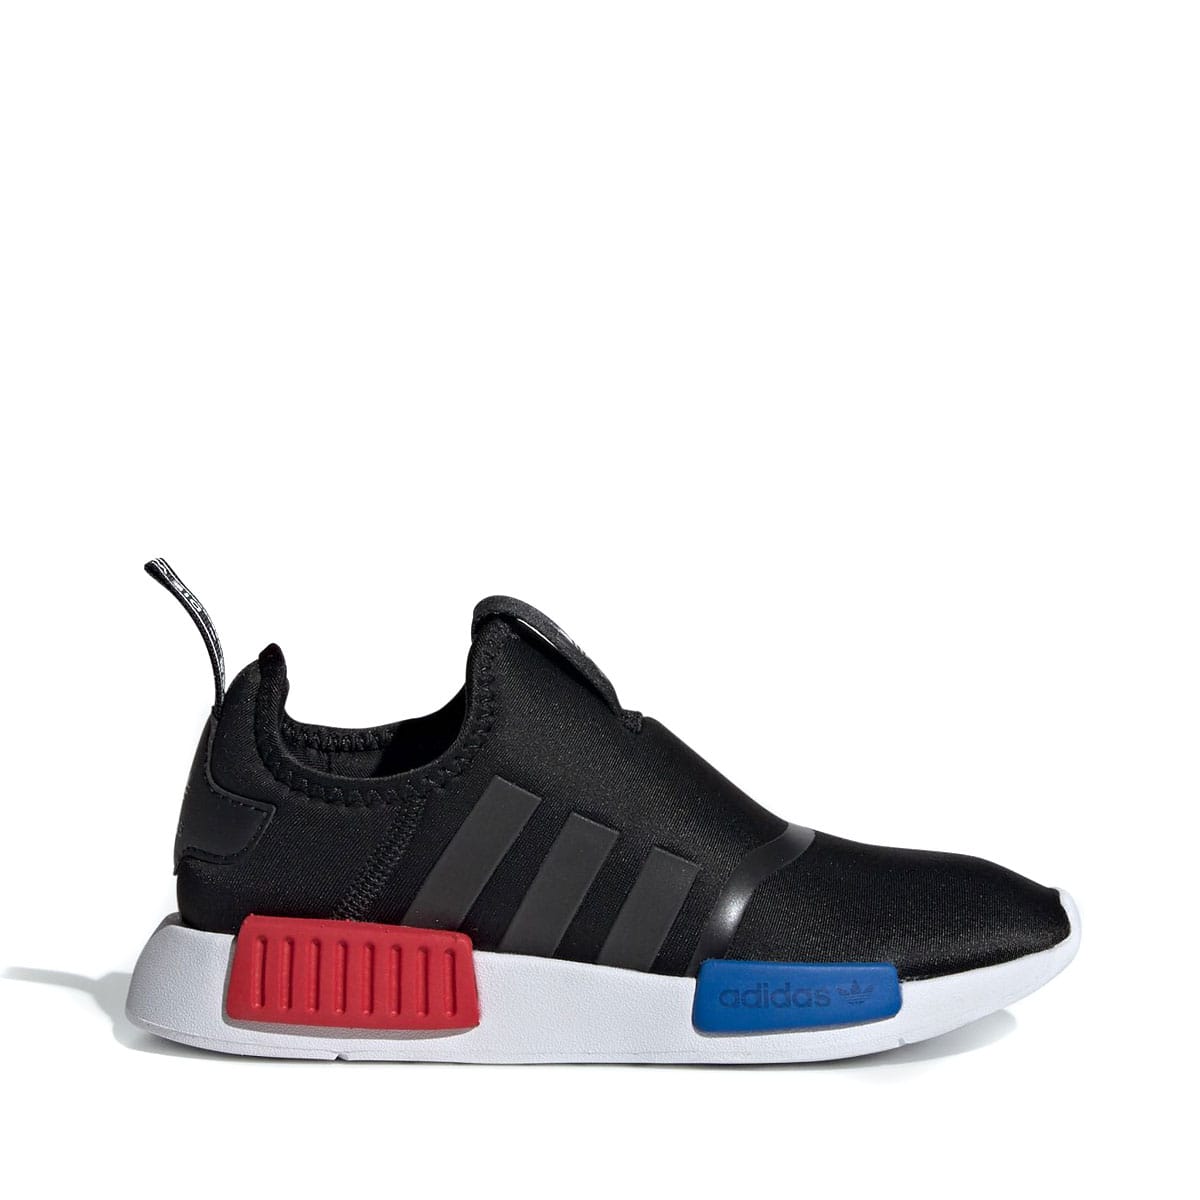 is adidas nmd good for running